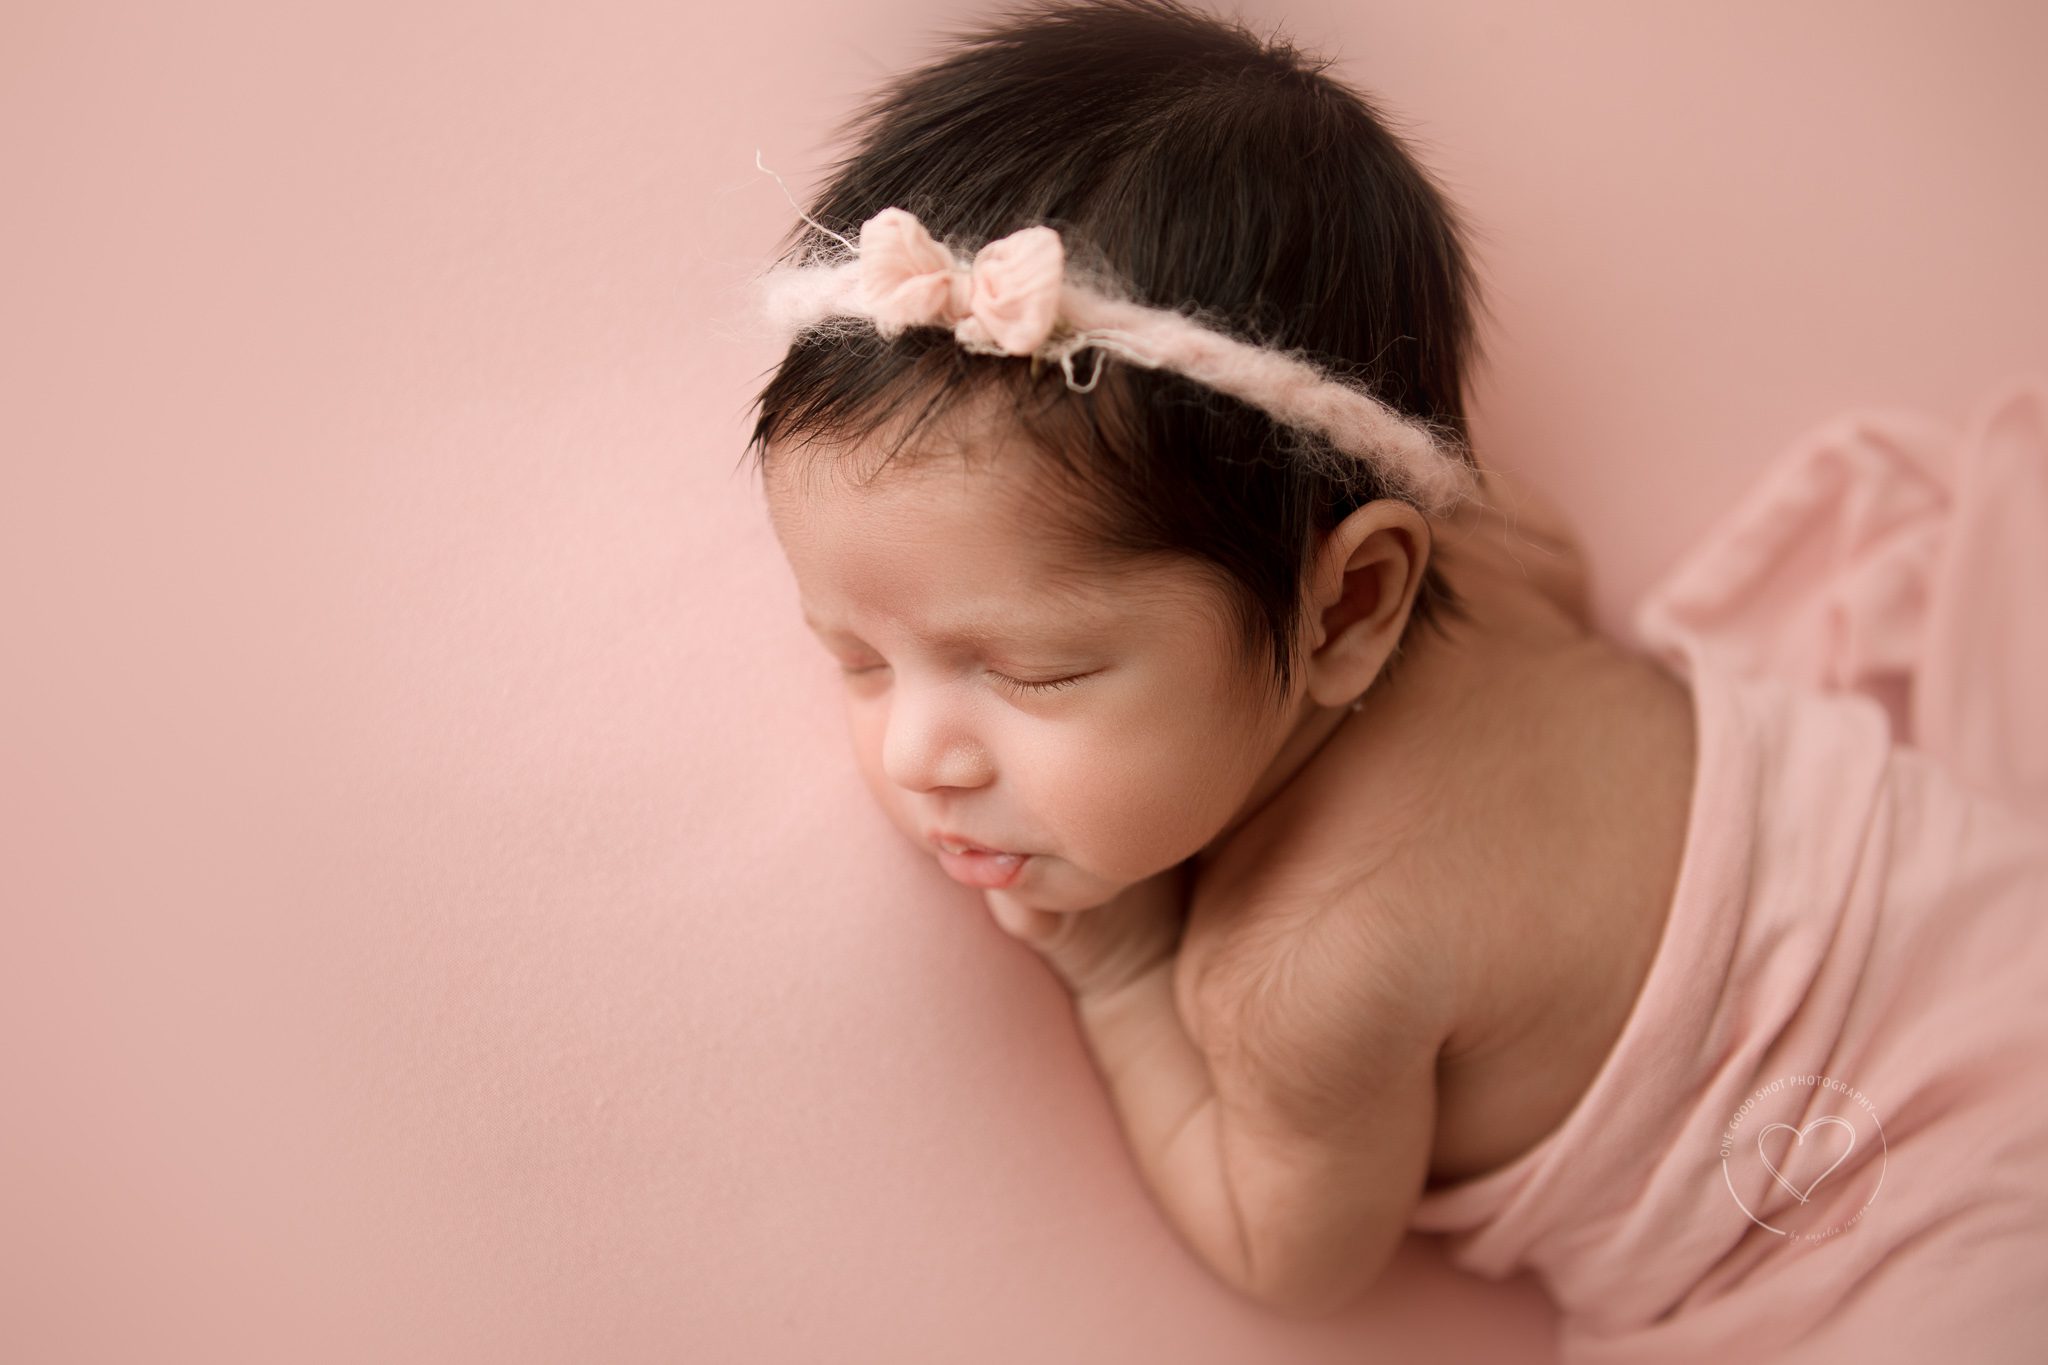 fresno newborn photographer, close up of baby lashes, pink background, pink bow